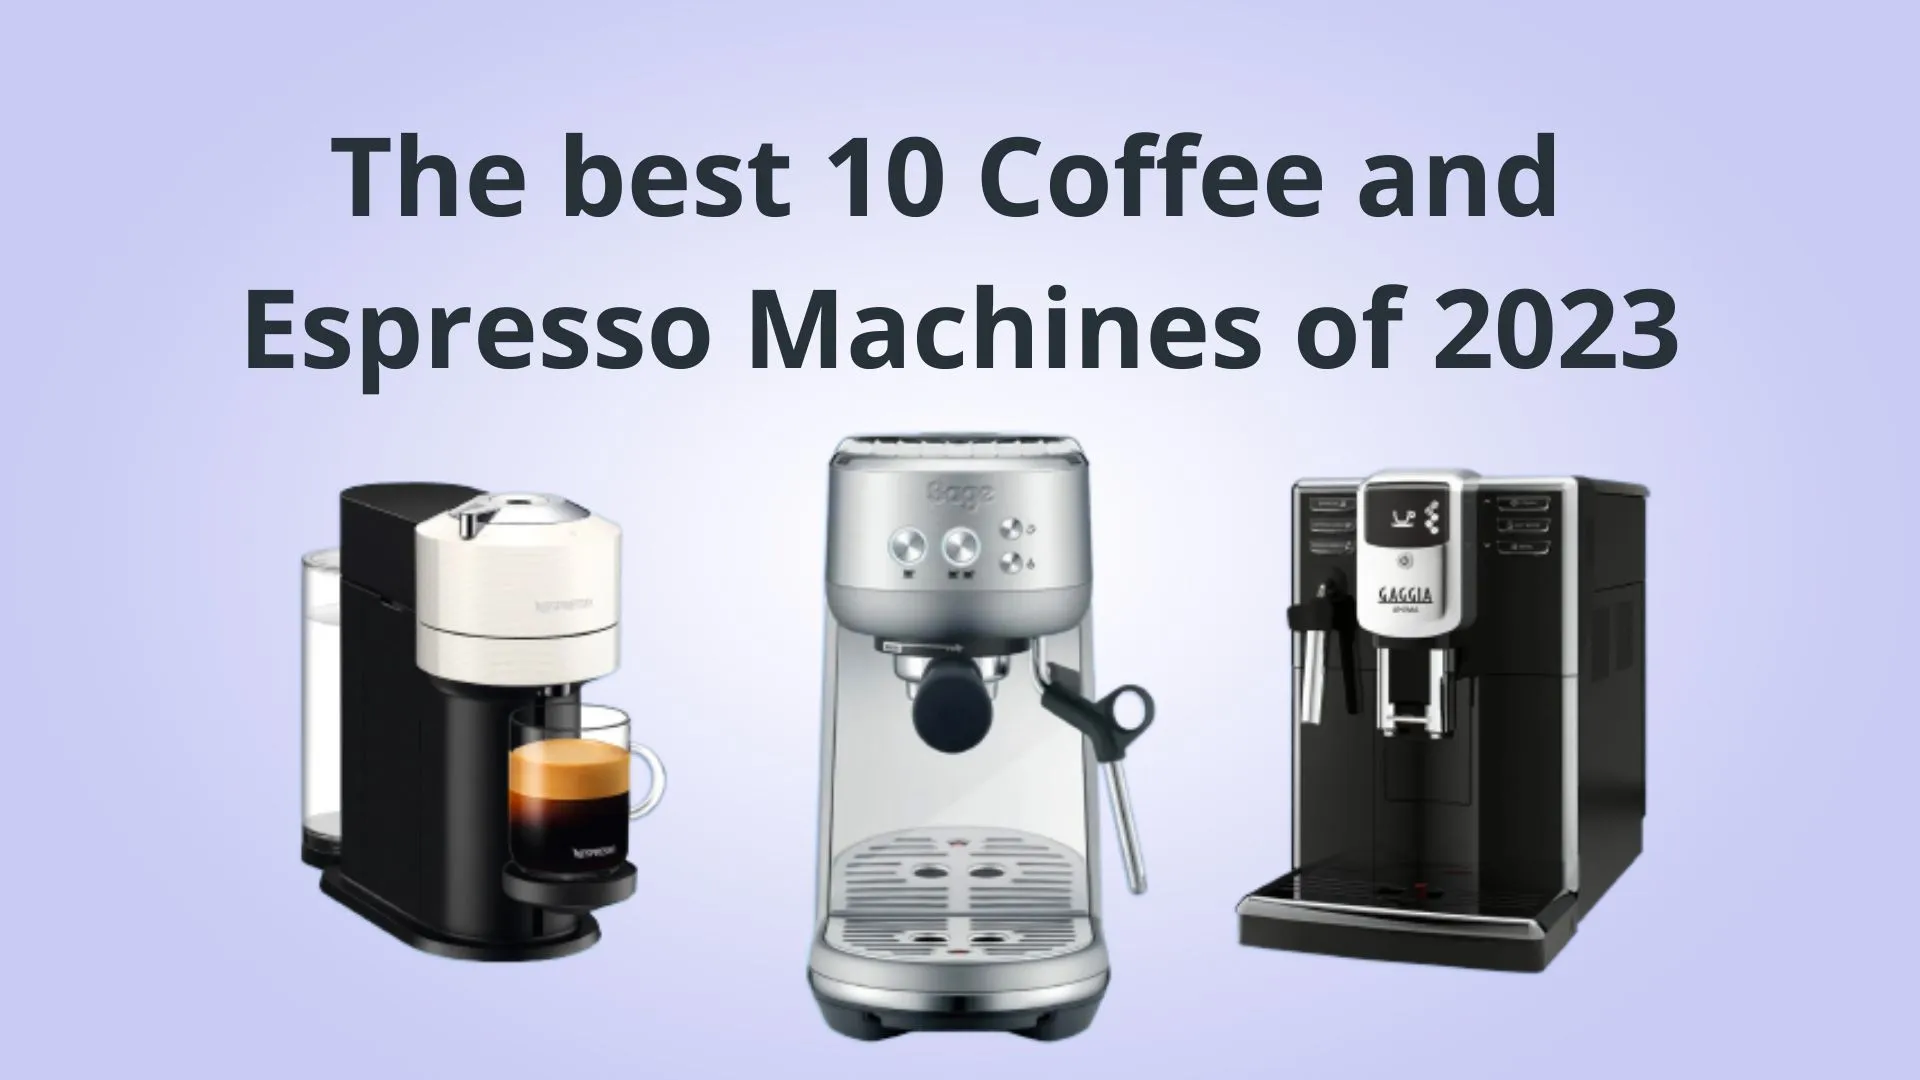 The best 10 Coffee and Espresso Machines of 2023 – Tested and Reviewed